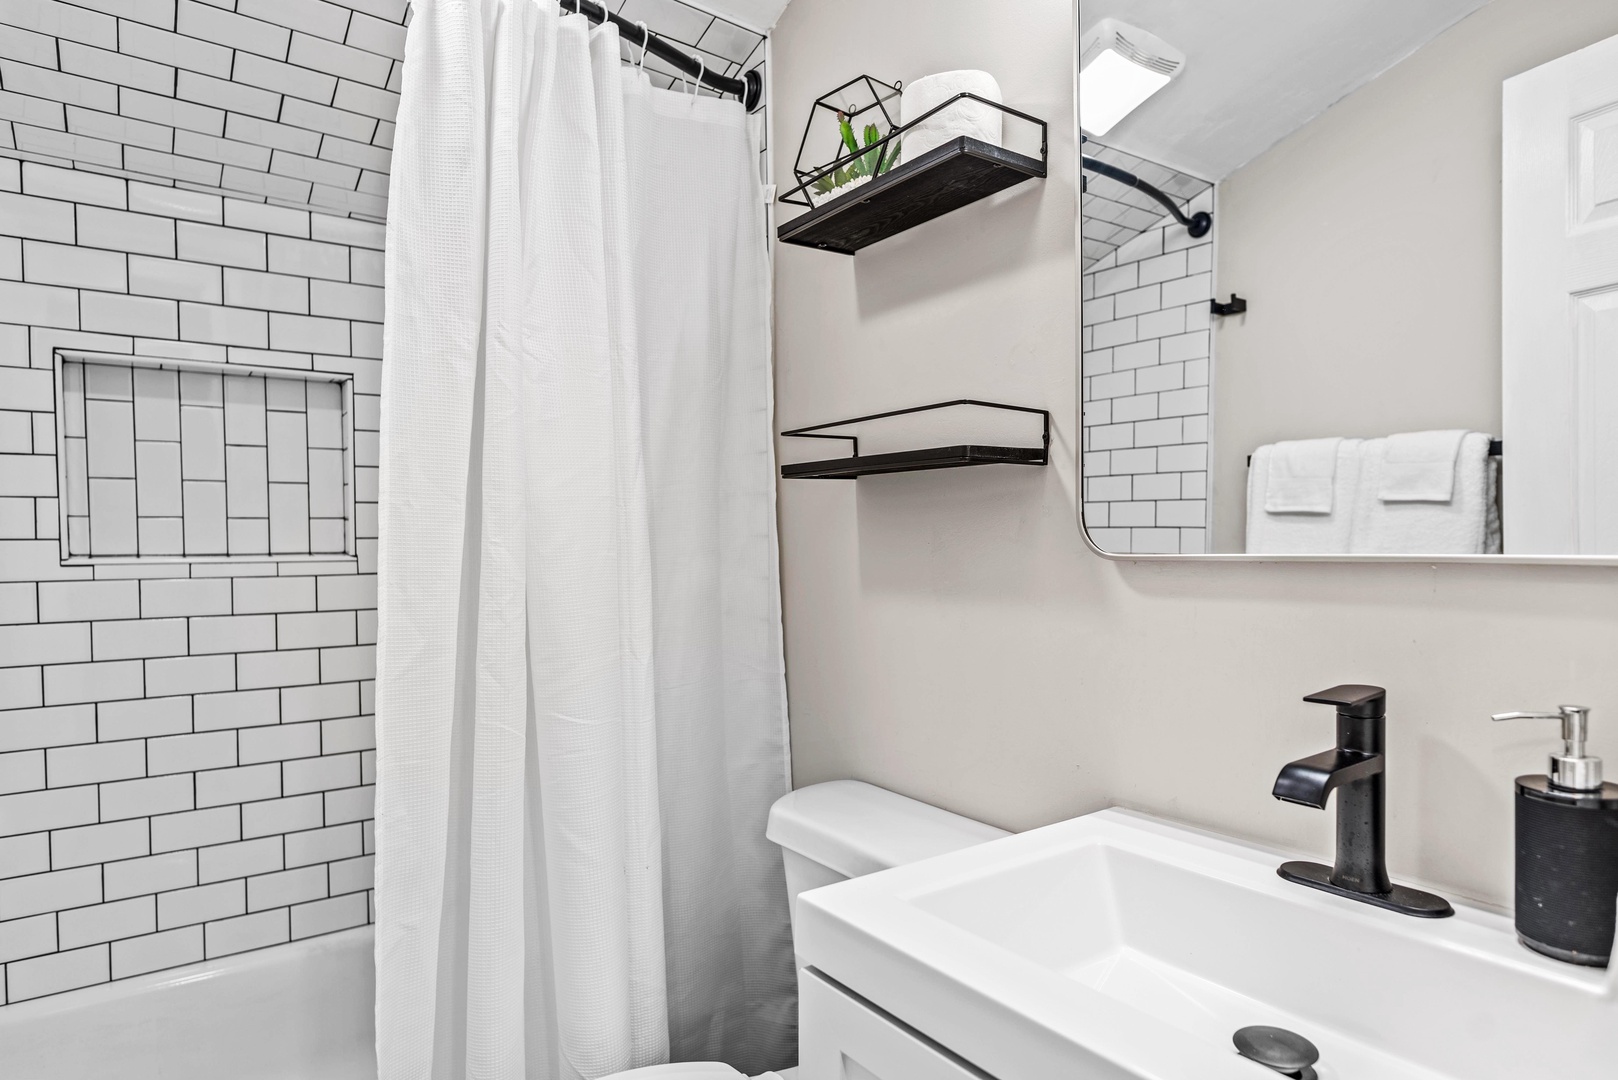 The full bathroom boasts chic finishes & a shower/tub combo